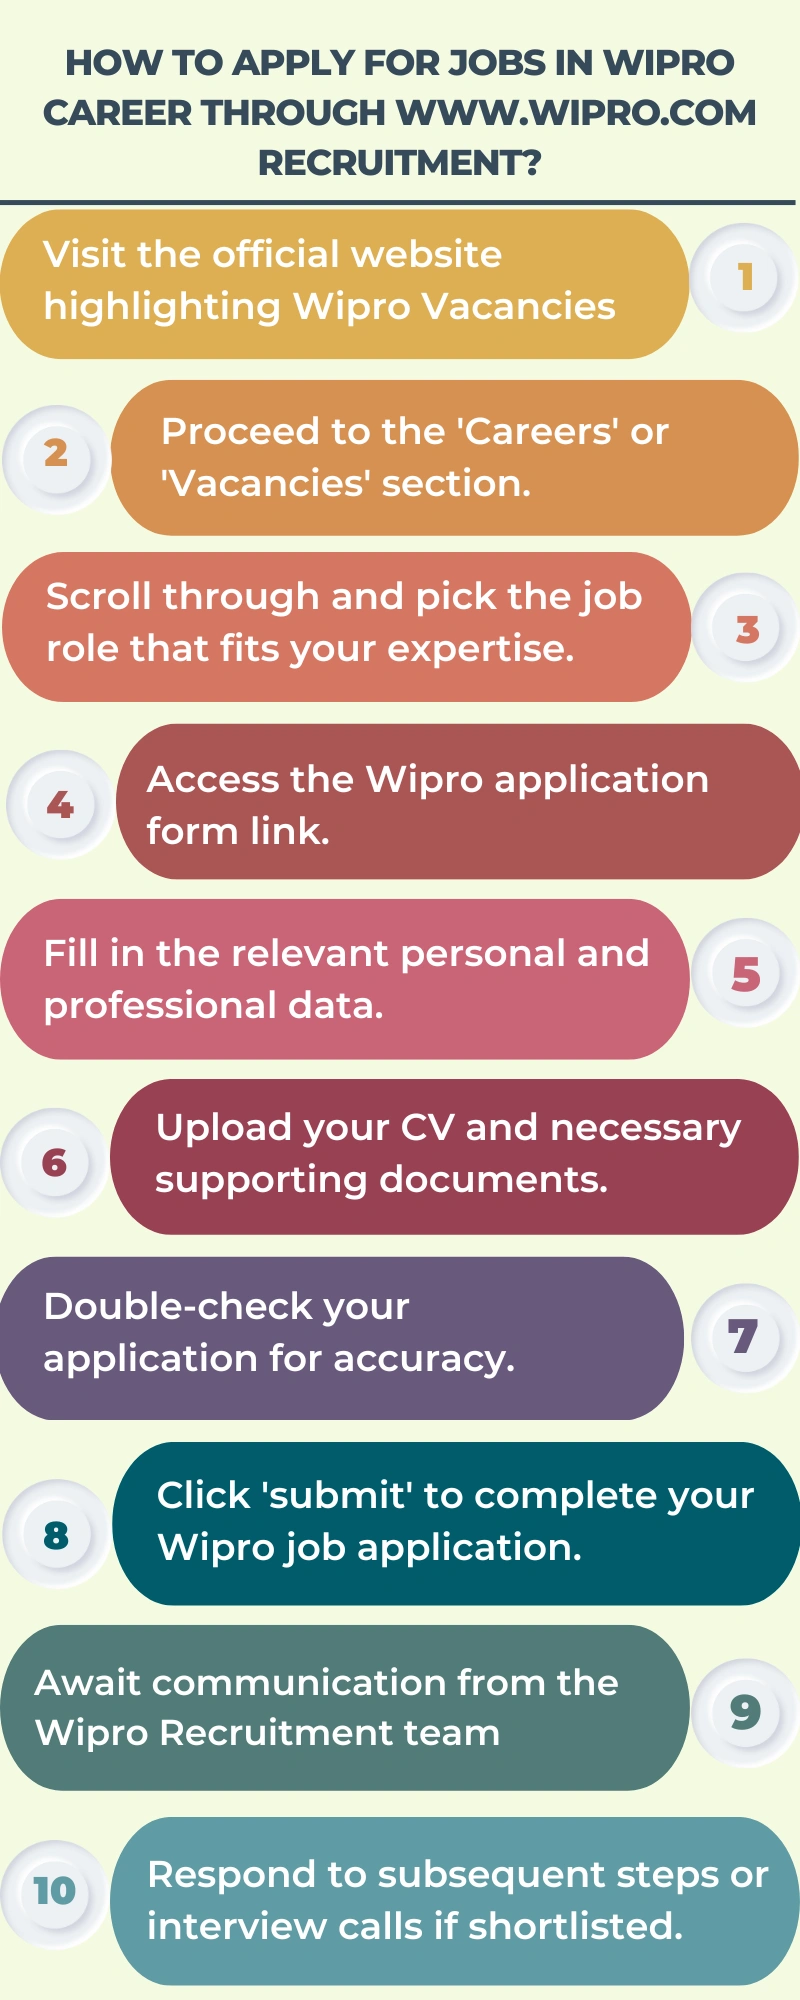 How to Apply for Jobs in Wipro Career through www.wipro.com recruitment?